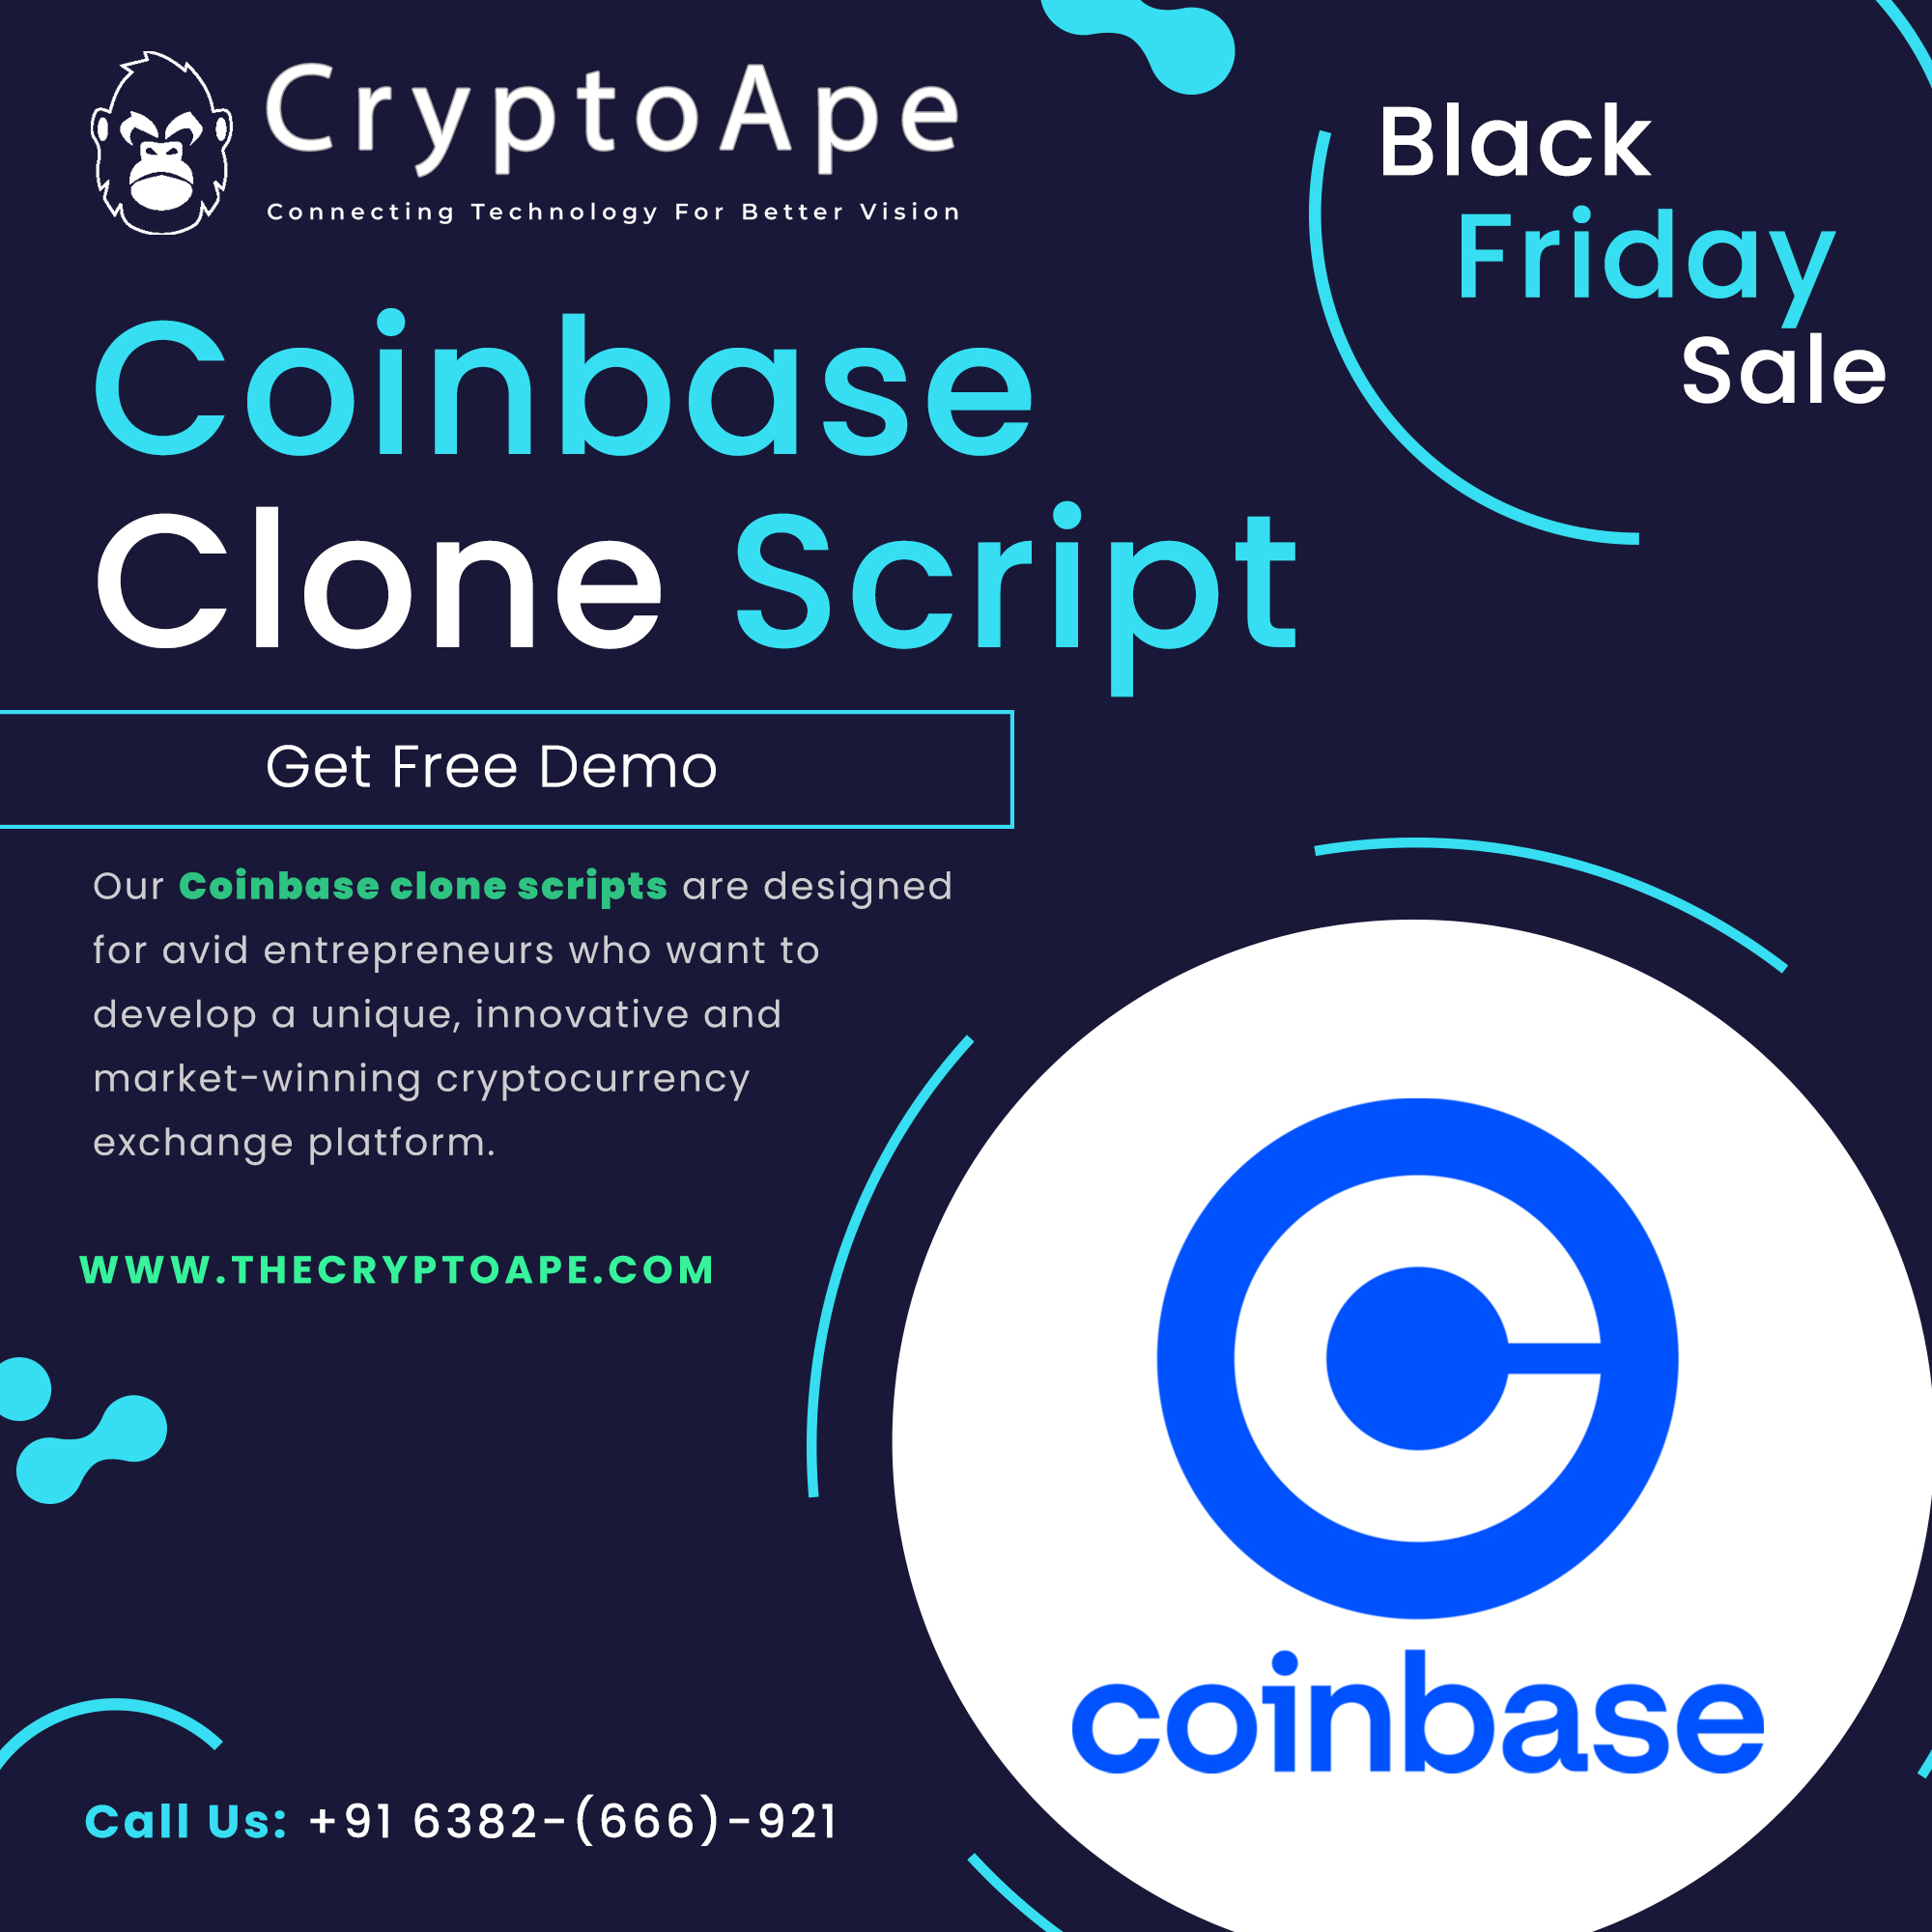 h
OY LATE IN
Friday

Coinbase al
Clone Script

Get Free Demo |
Our Coinbase clone scripts are designed a
for avid entrepreneurs who want to

develop a unique, innovative and

market-winning cryptocurrency

exchange platform.
WWW.THECRYPTOAPE.COM
®

Call Us: +91 6382-(666)-921